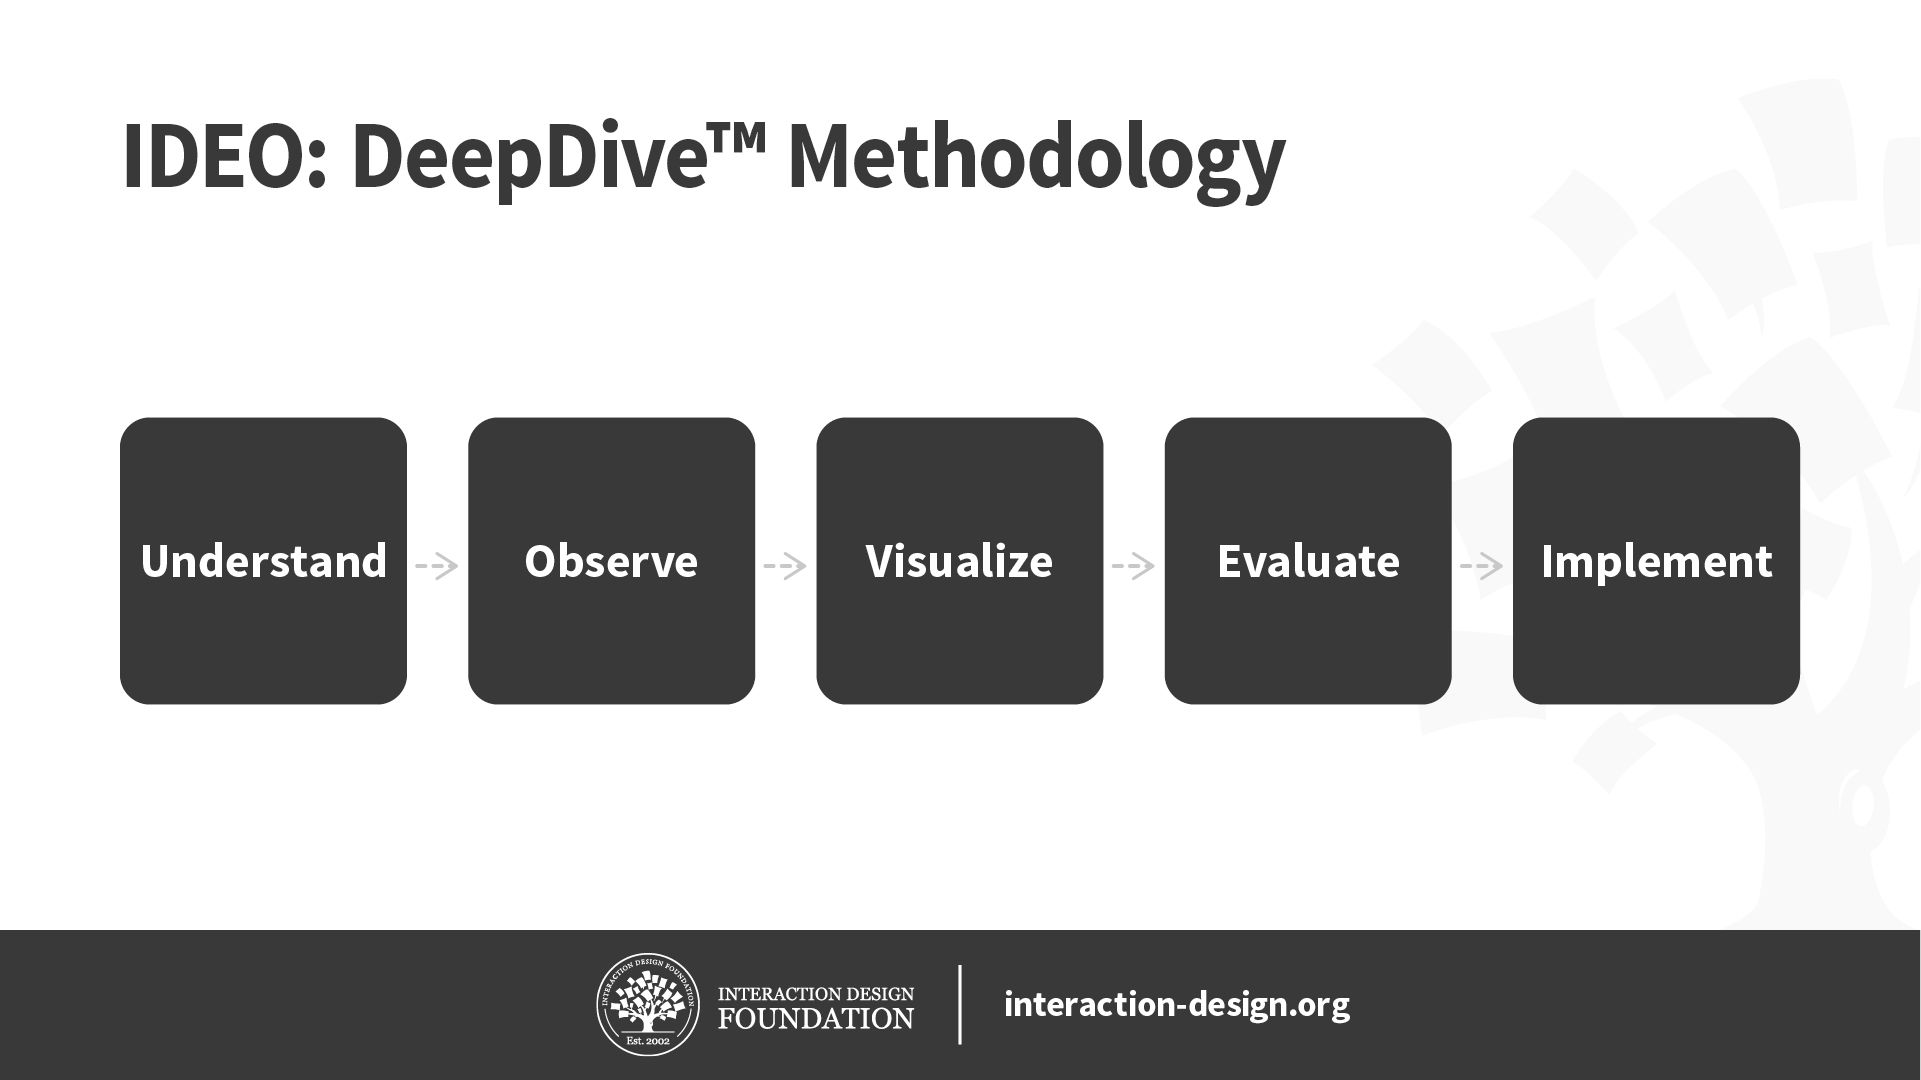 Illustration of IDEO's DeepDive Methodology: Understand, Observe, Visualize, Evaluate, and Implement.